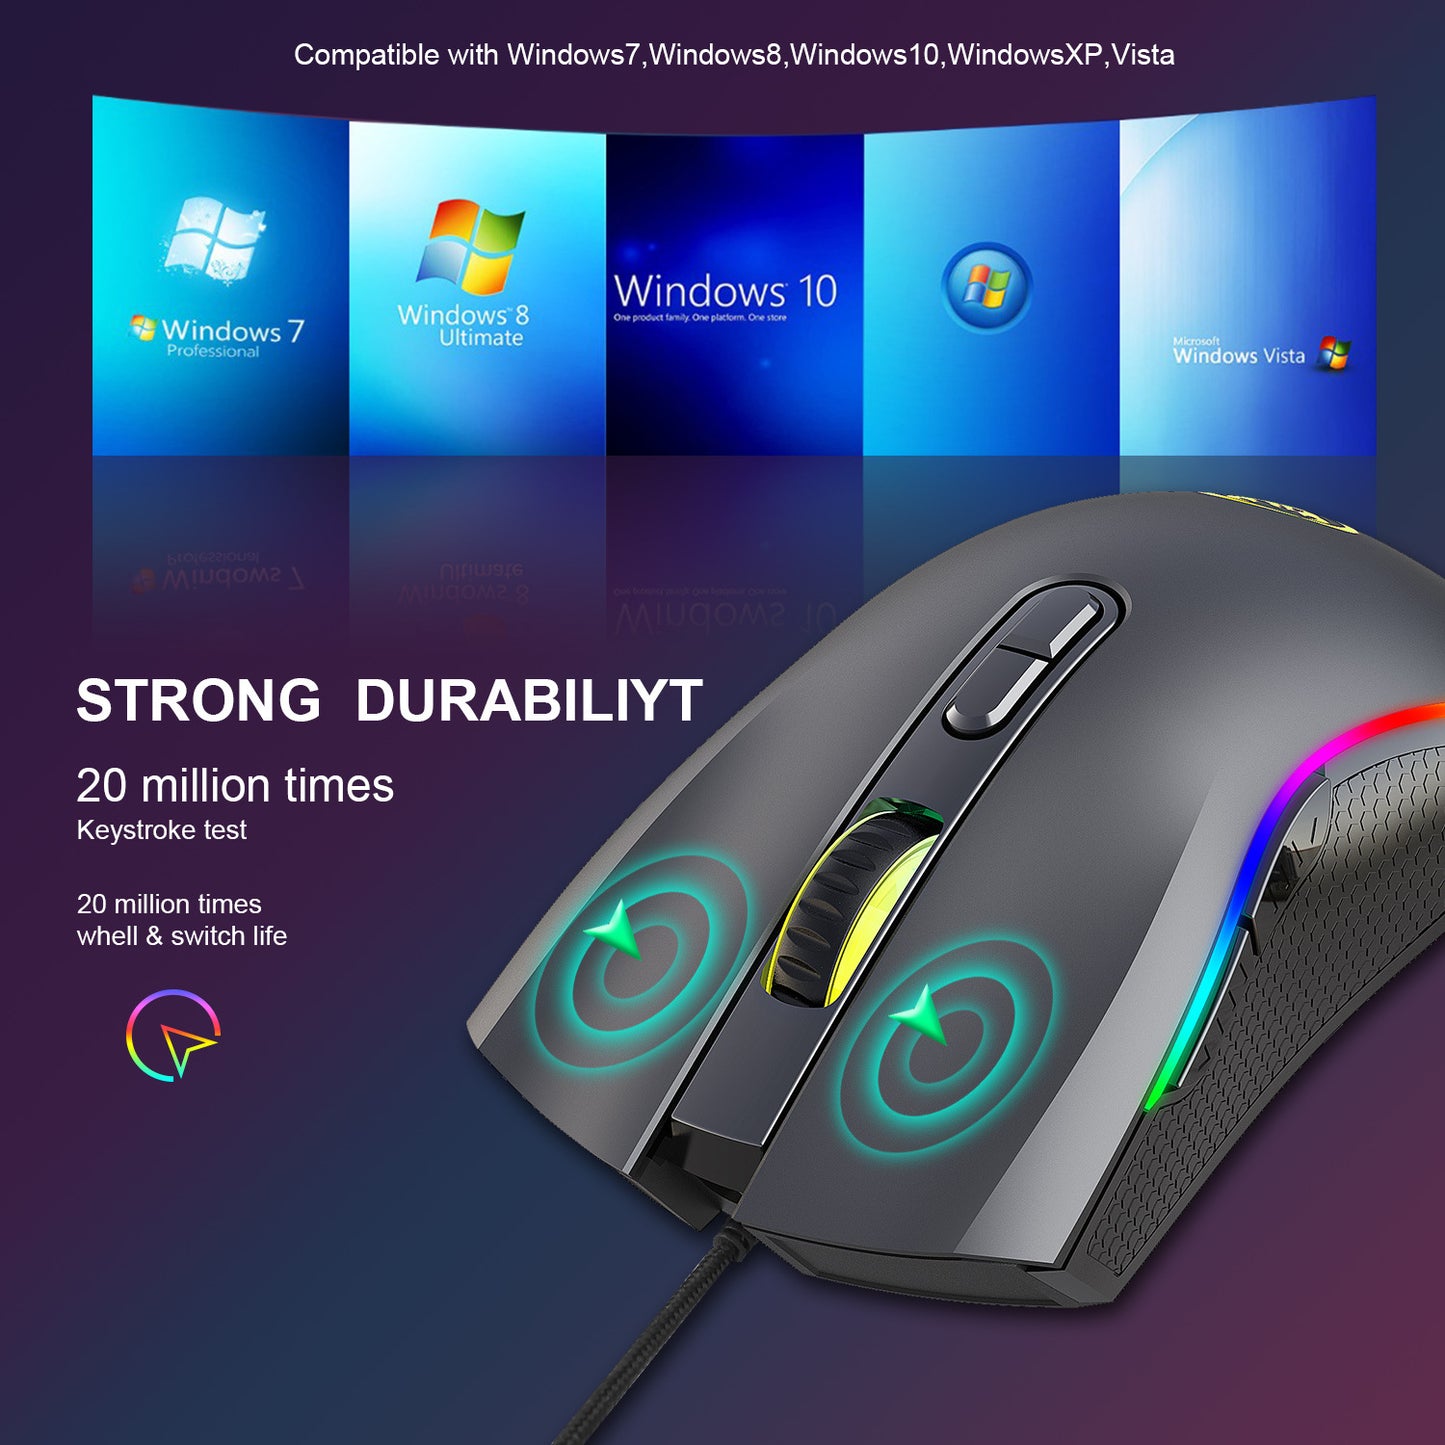 RGB Light 3200DPI Macro Programmable 7 Button Optical USB Wired Mouse